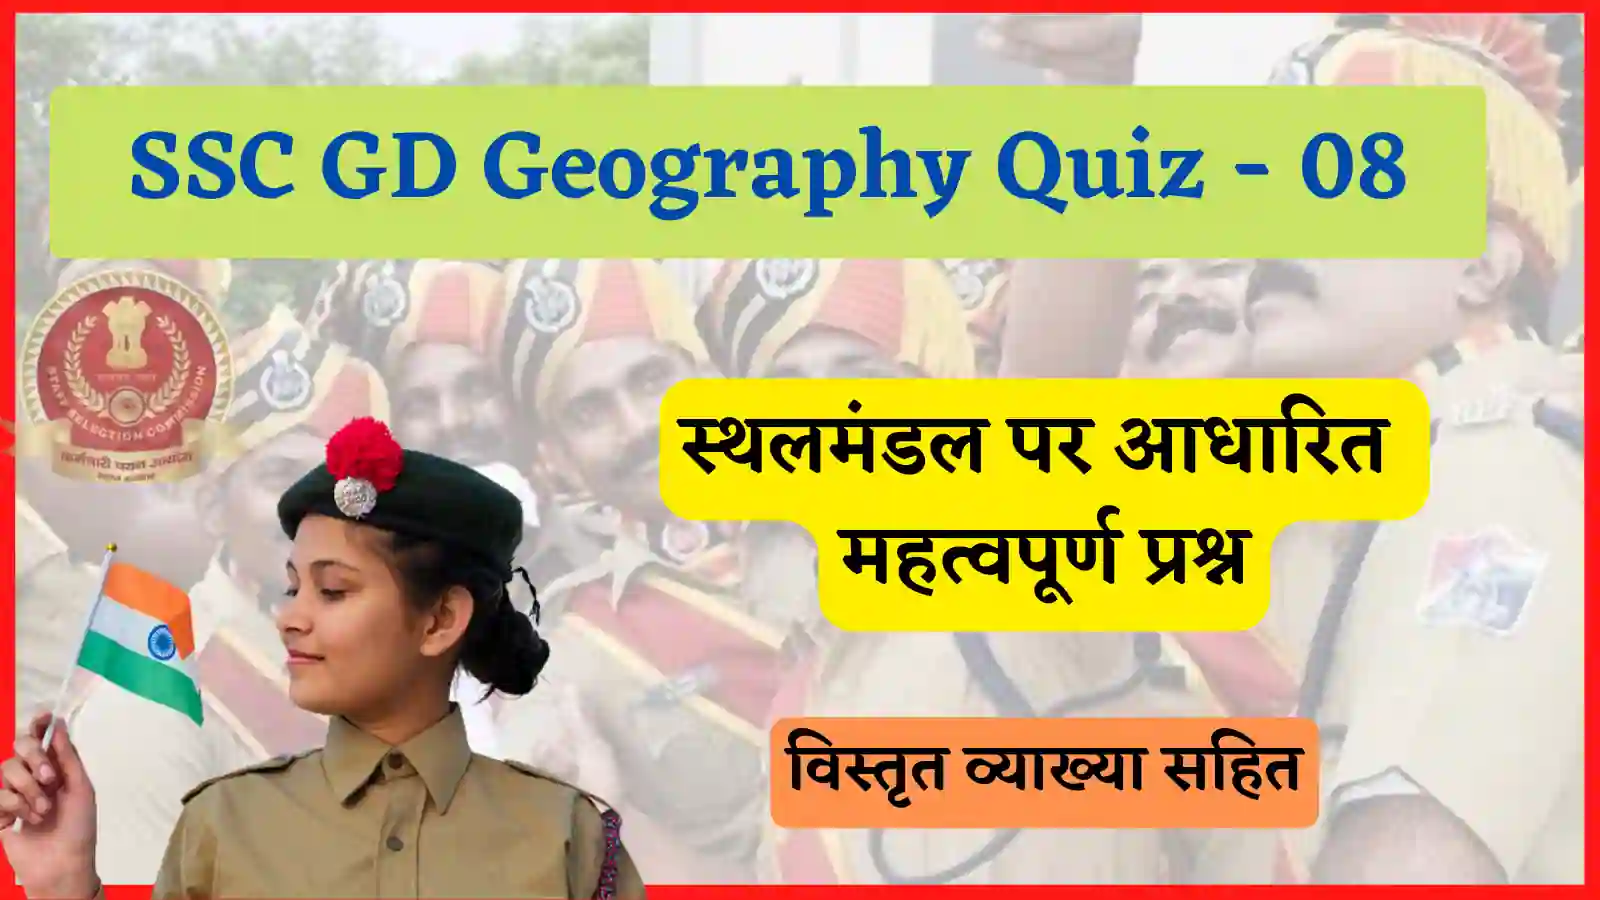 SSC GD Geography Quiz - 08